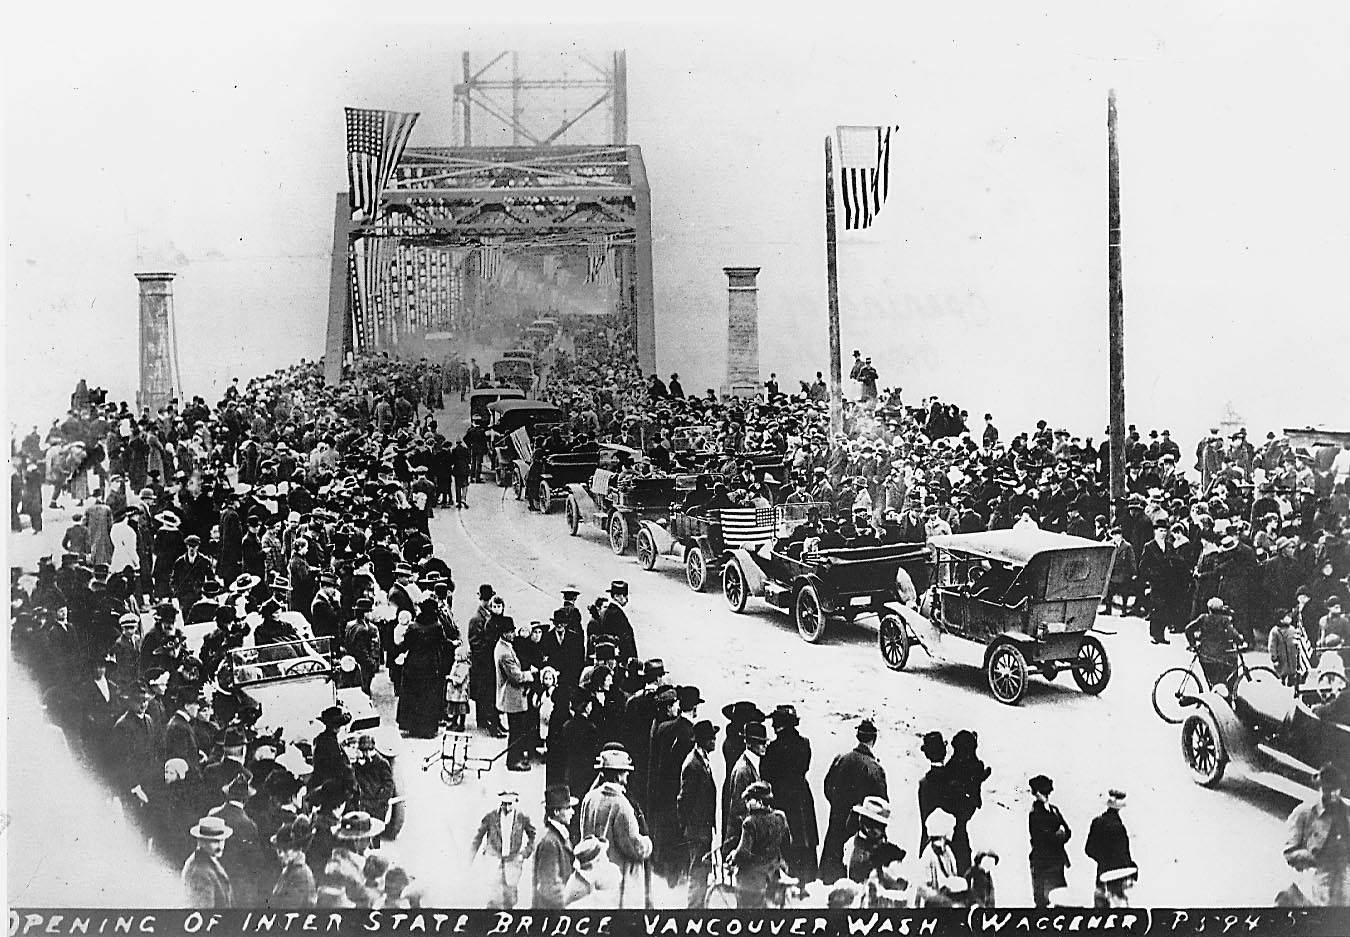 The Interstate Bridge, now called the Interstate 5 Bridge, opened in 1917. Some think the ghost of former mayor G.R.